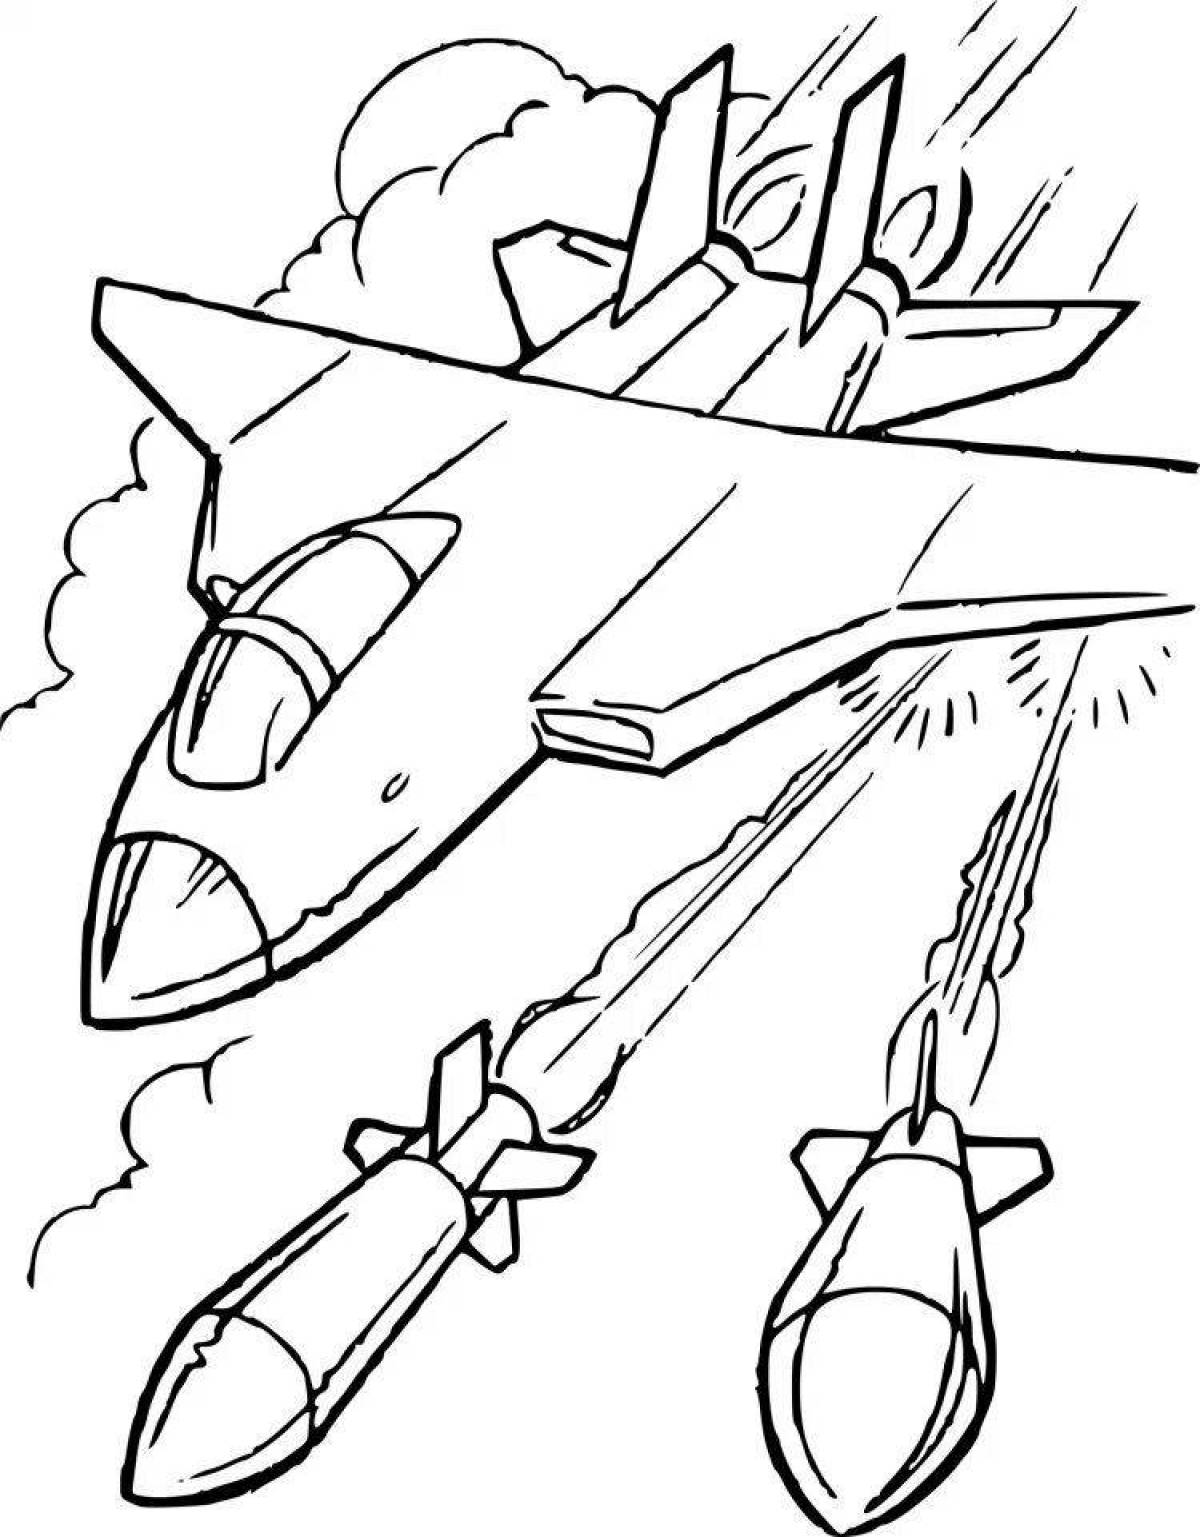 Joyful military coloring book for 6-7 year olds